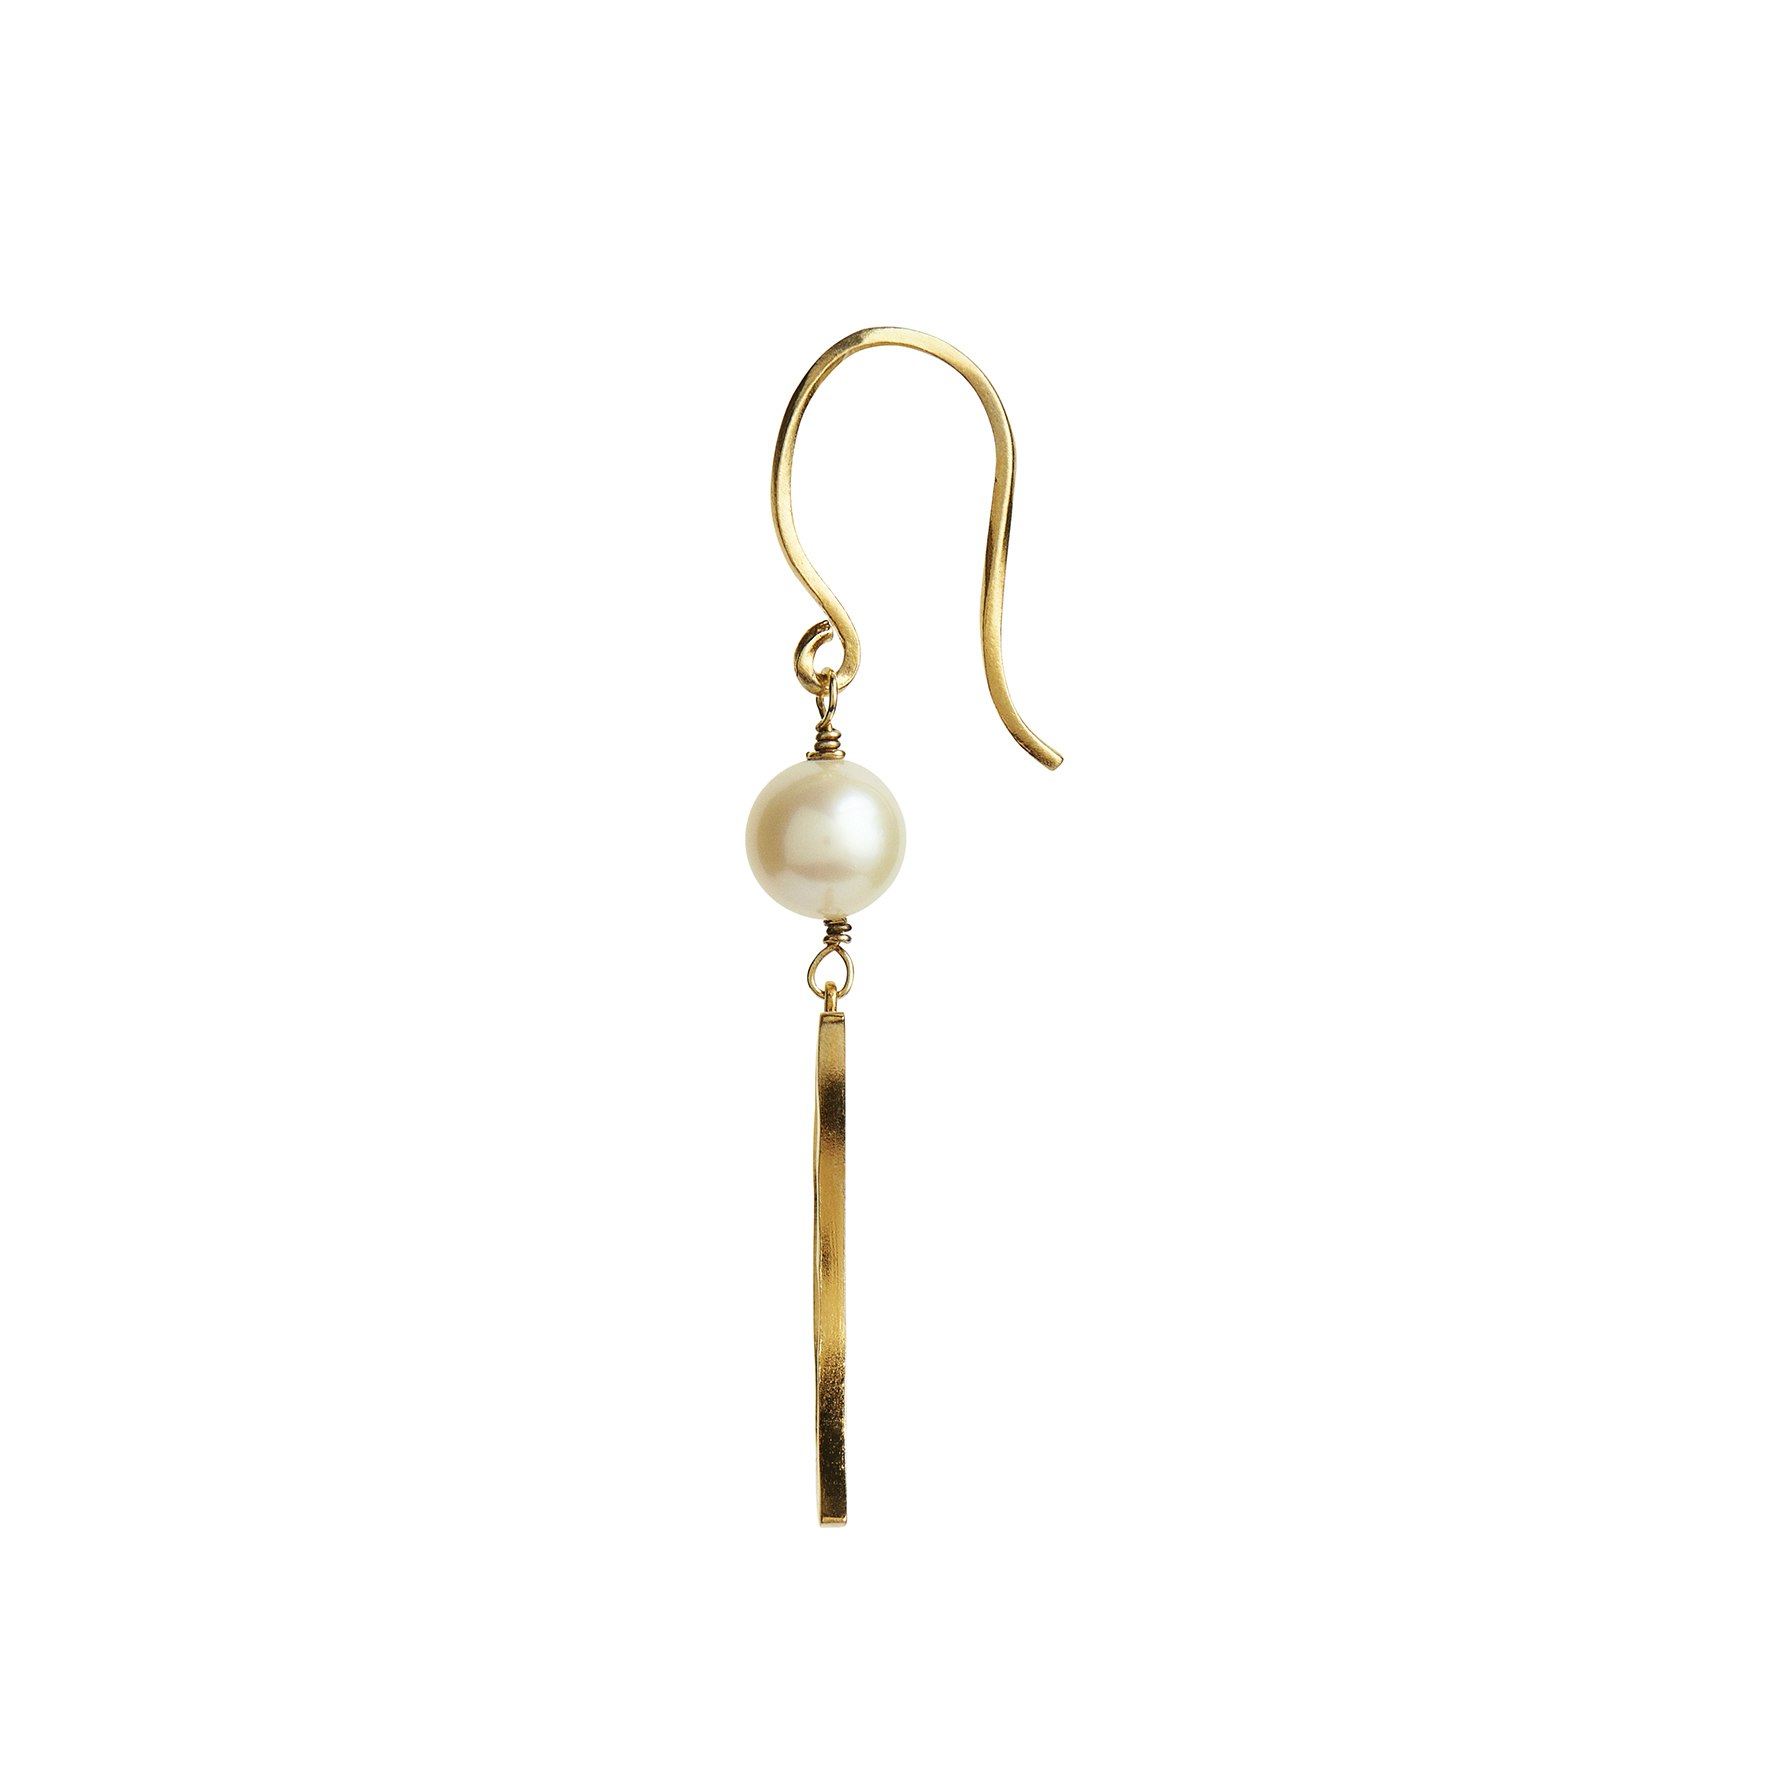 Bella Moon Earring With Pearl fra STINE A Jewelry i Forgylt-Sølv Sterling 925